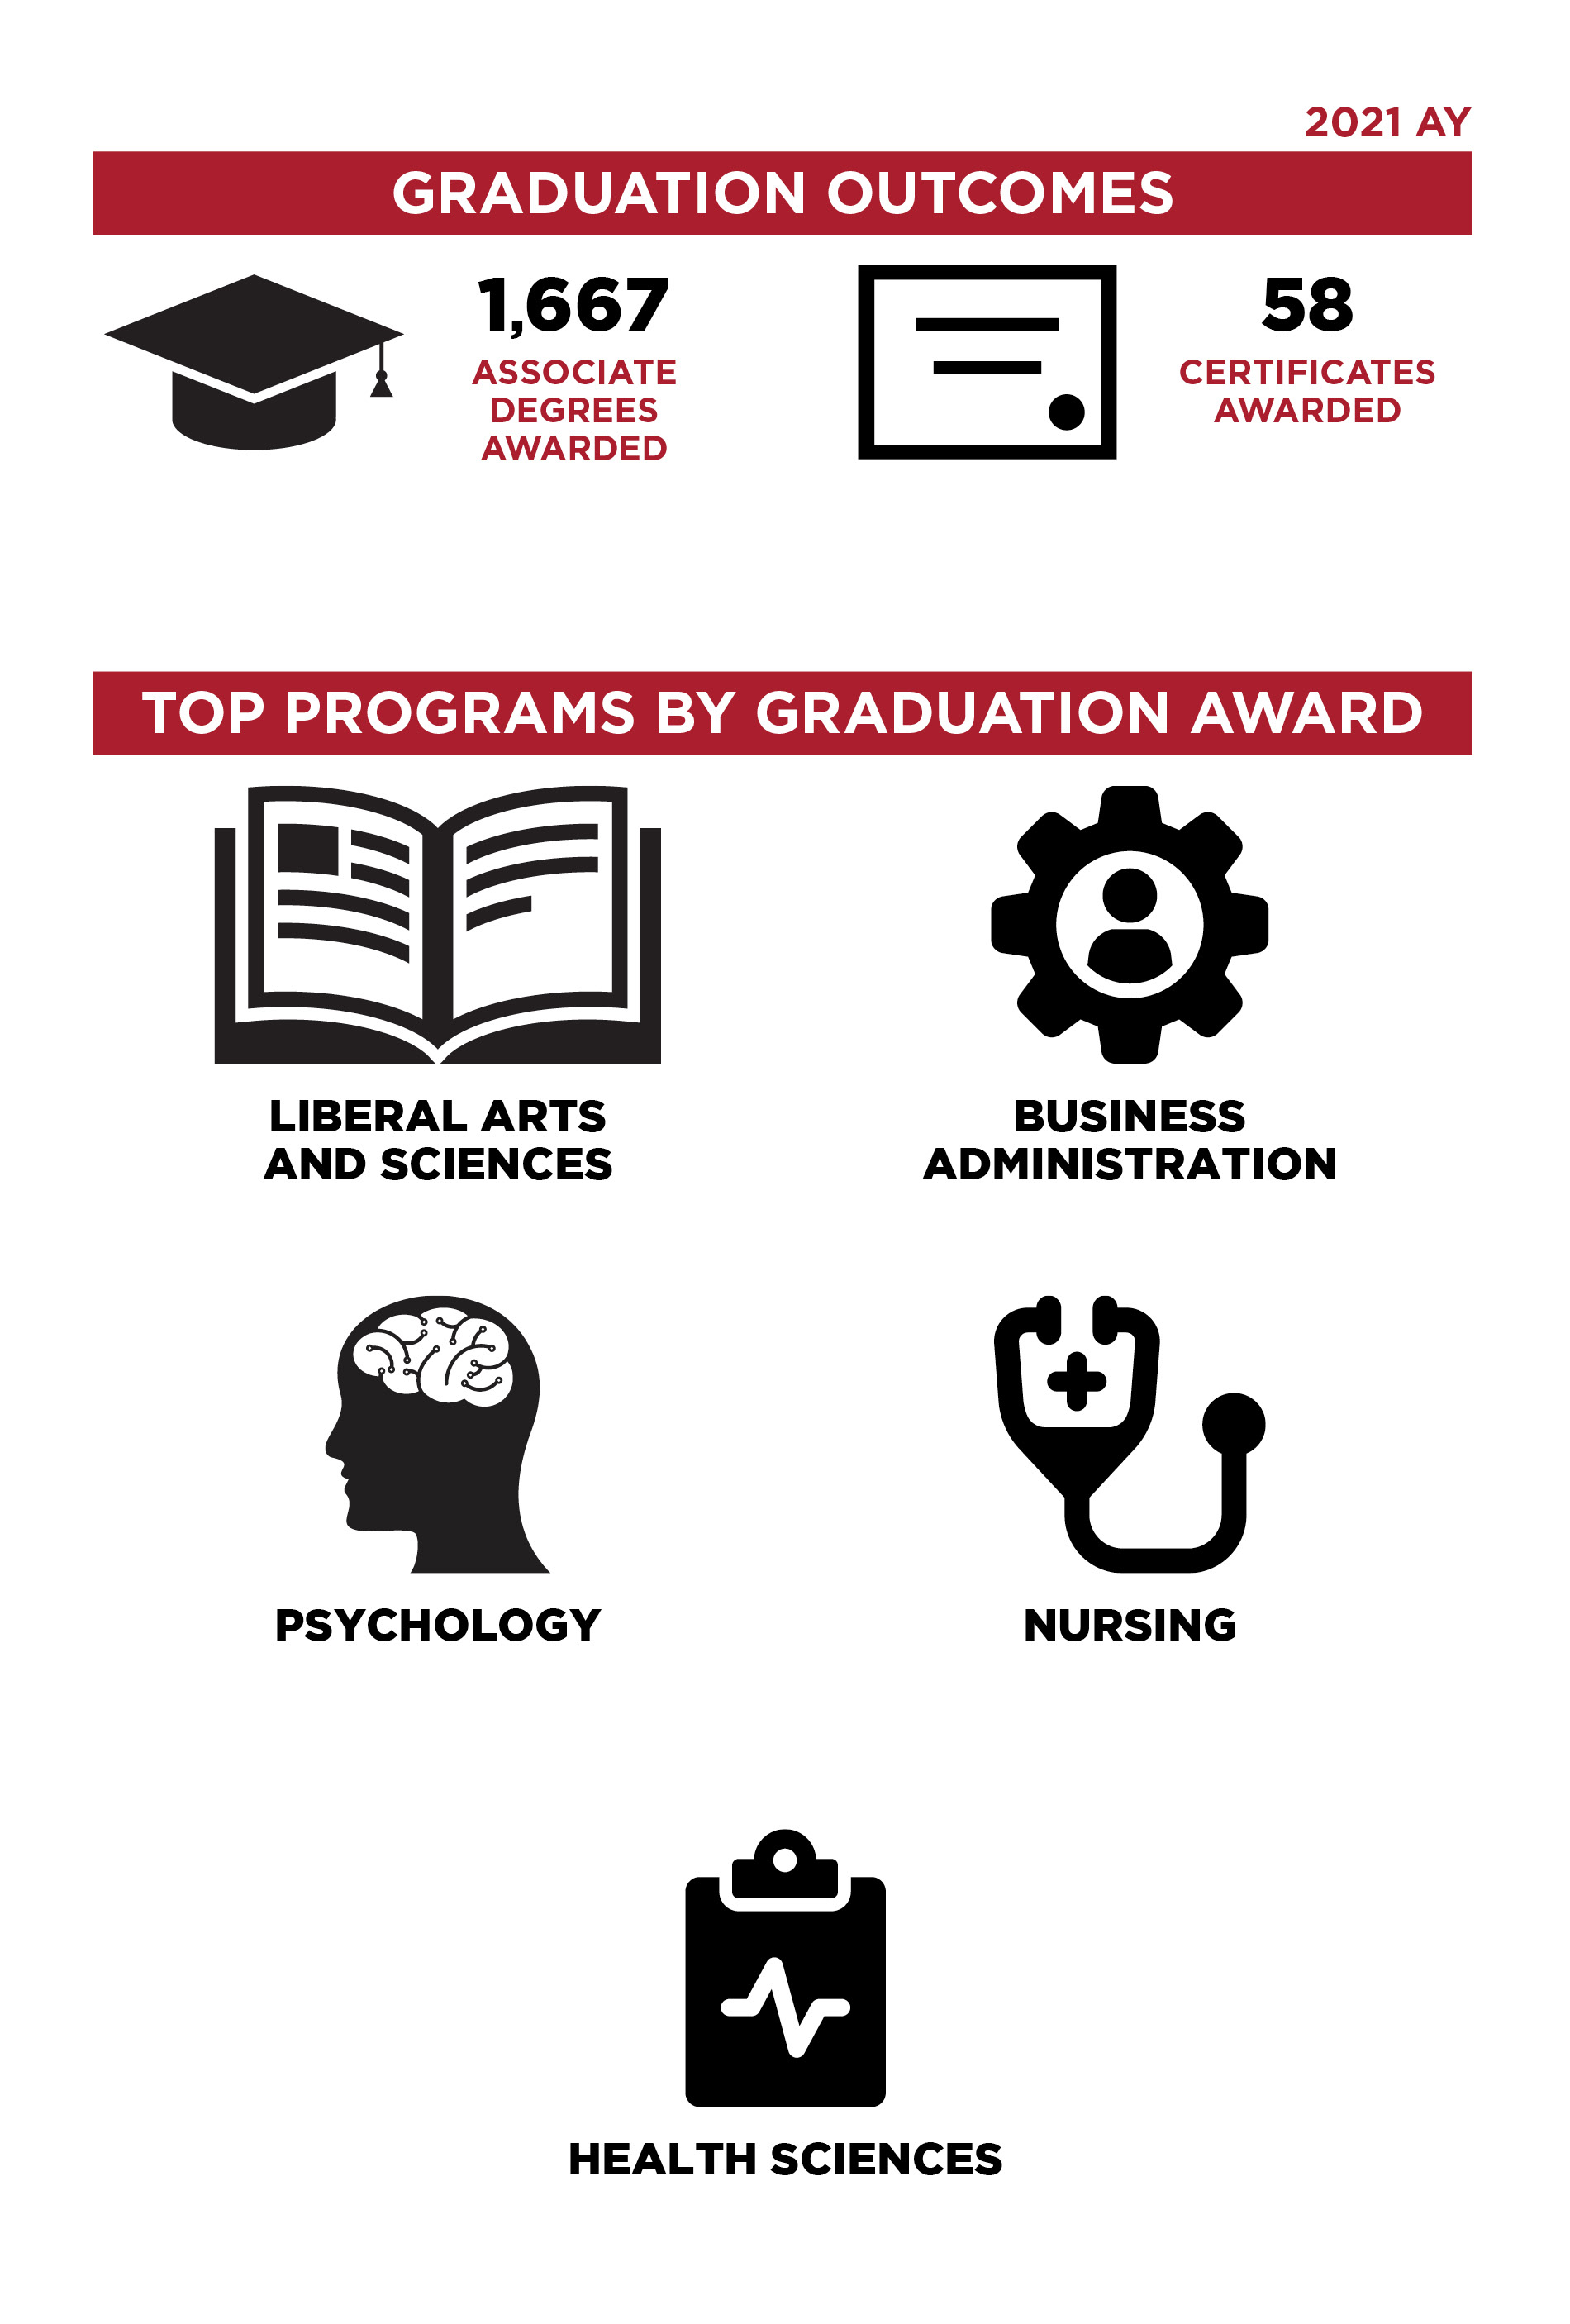 Graduation Data Infographic - See below for accessible text data